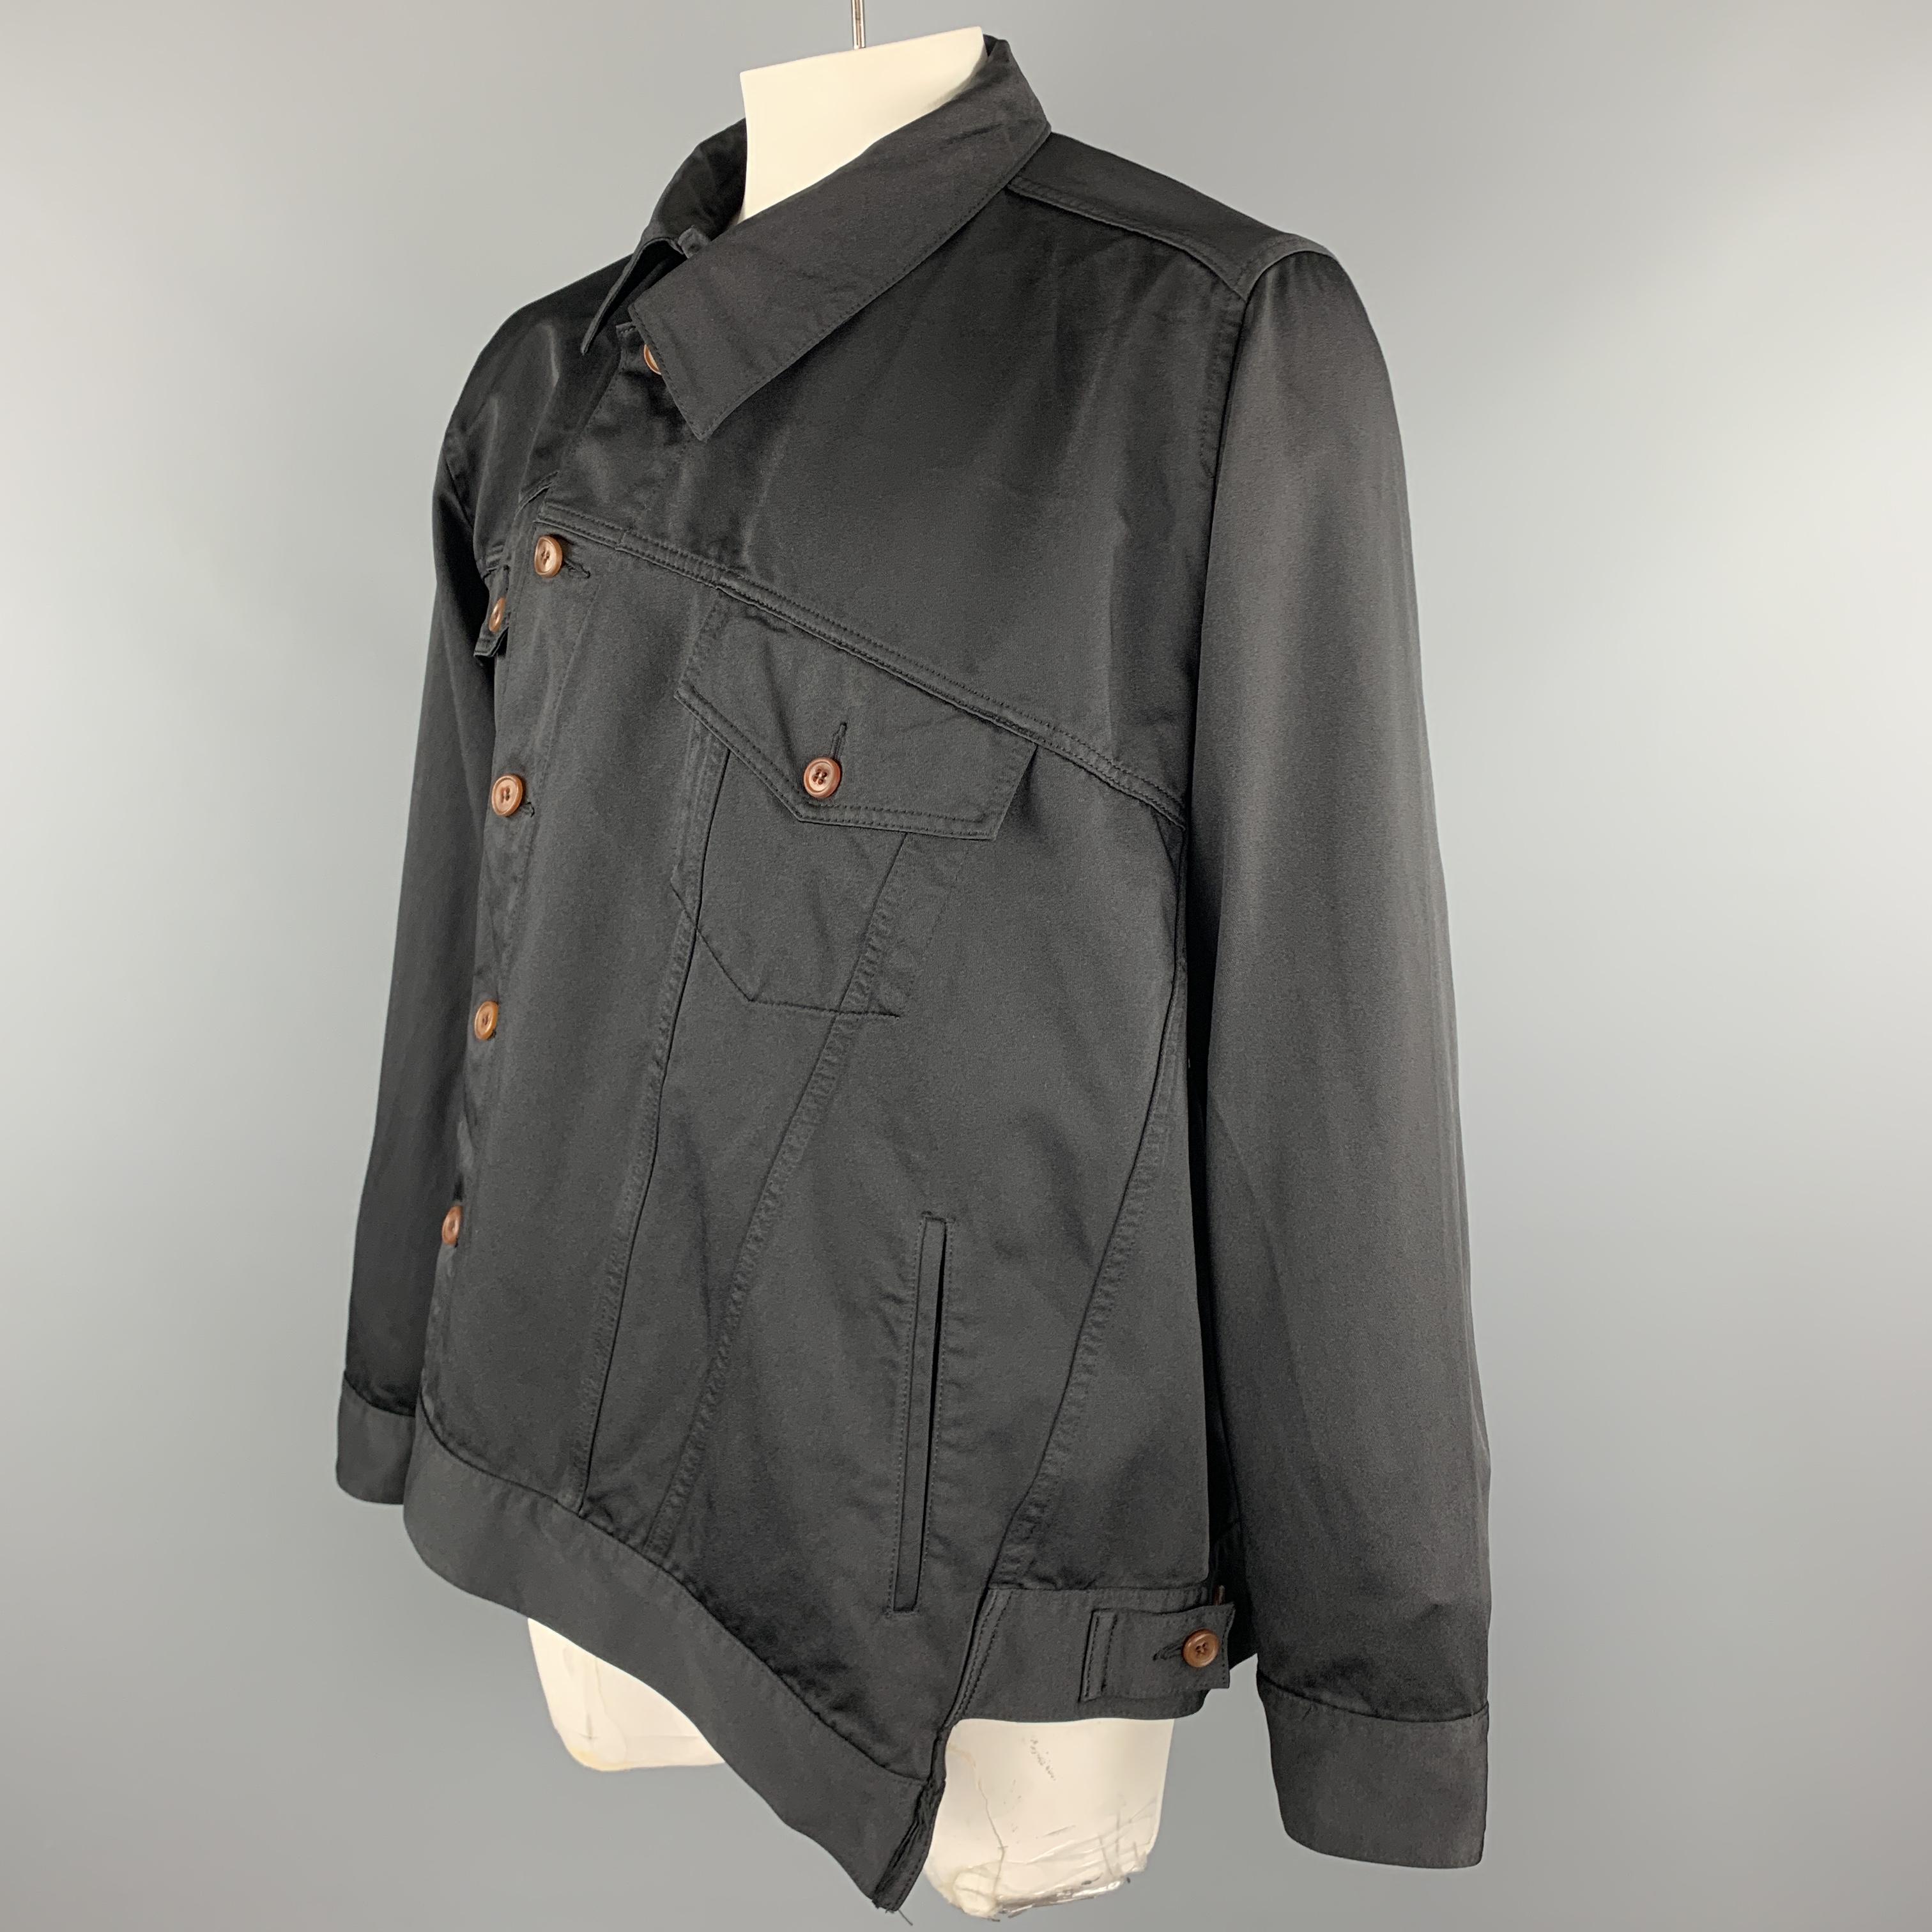 COMME des GARCONS HOMME PLUS Fall Winter 2018 Collection trucker jacket comes in black shiny gabardine with am oversized silhouette, patch flap pockets, shifted collar, and asymmetrical button front. Made in Japan.

Excellent Pre-Owned